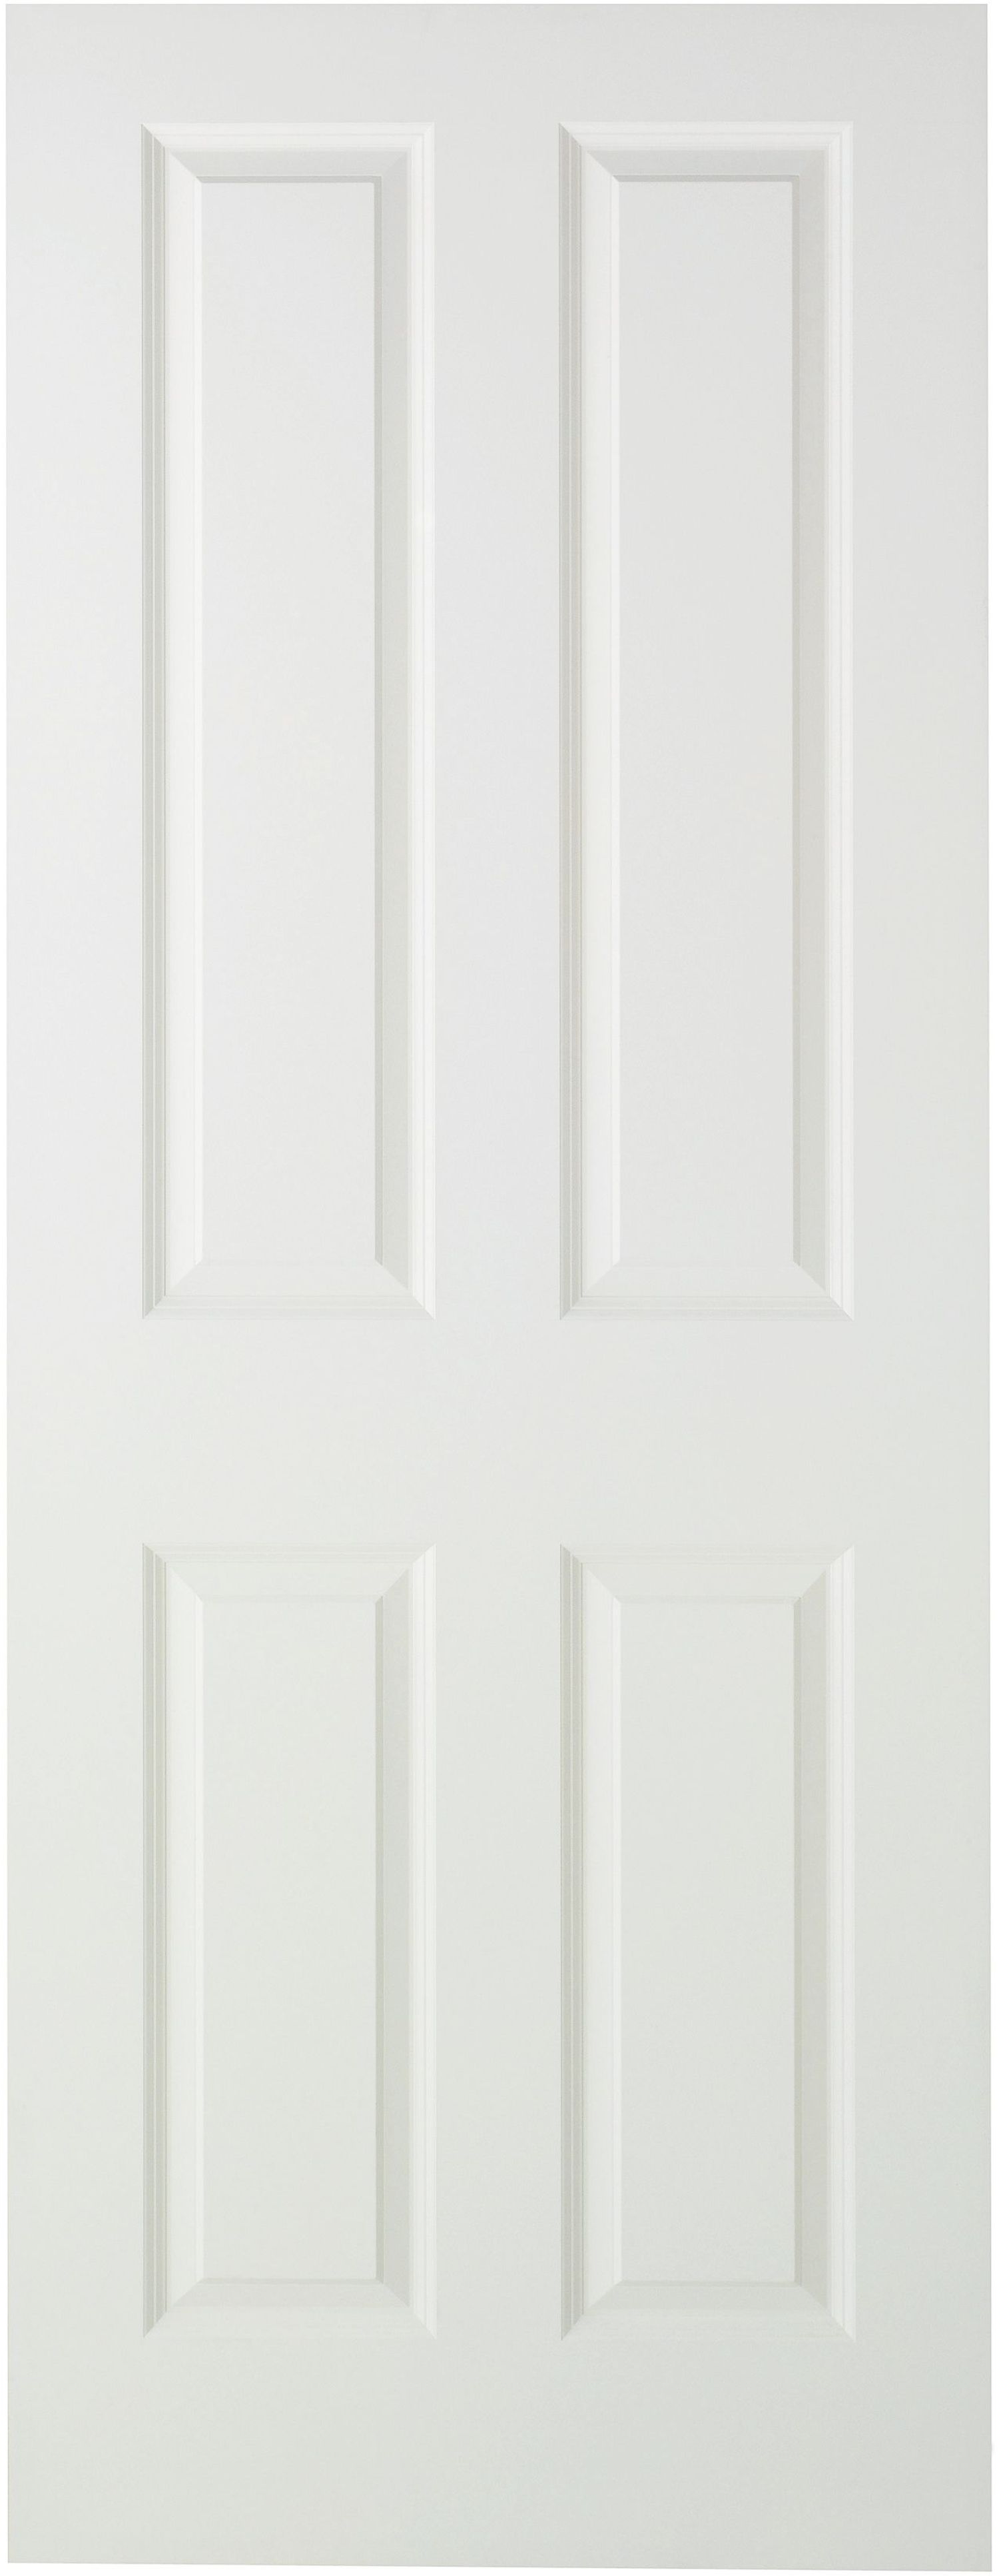 Wickes Chester White Smooth Moulded 4 Panel Internal Fire Door - 1981mm